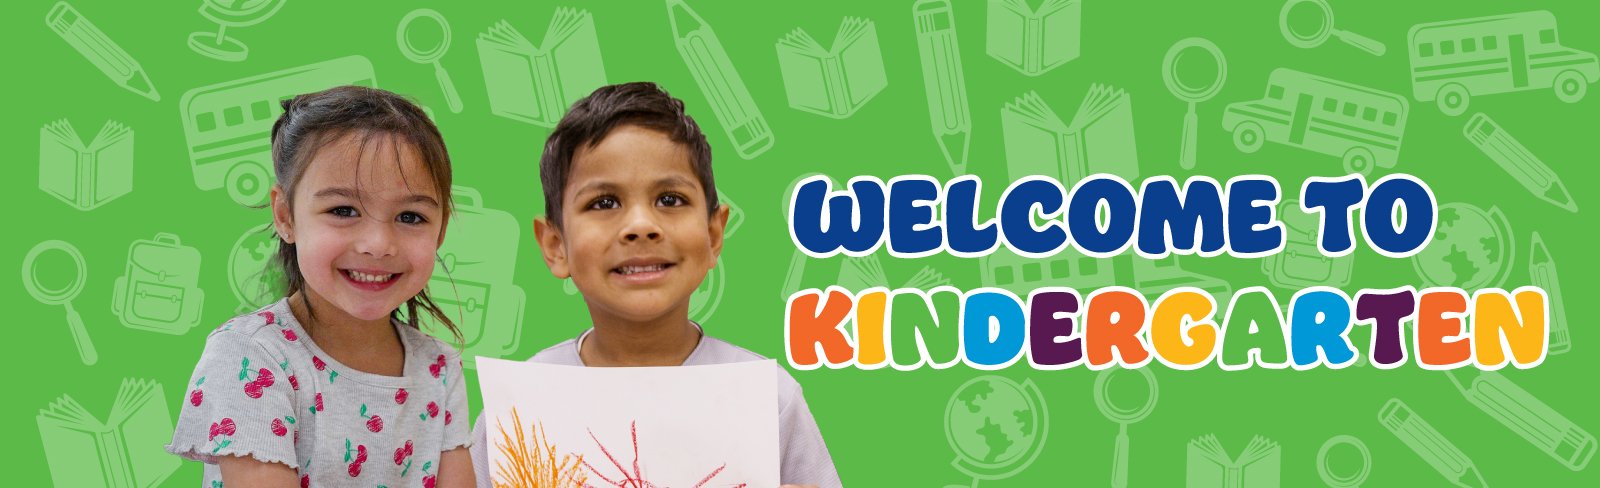 Green Banner with Welcome to Kindergarten text 